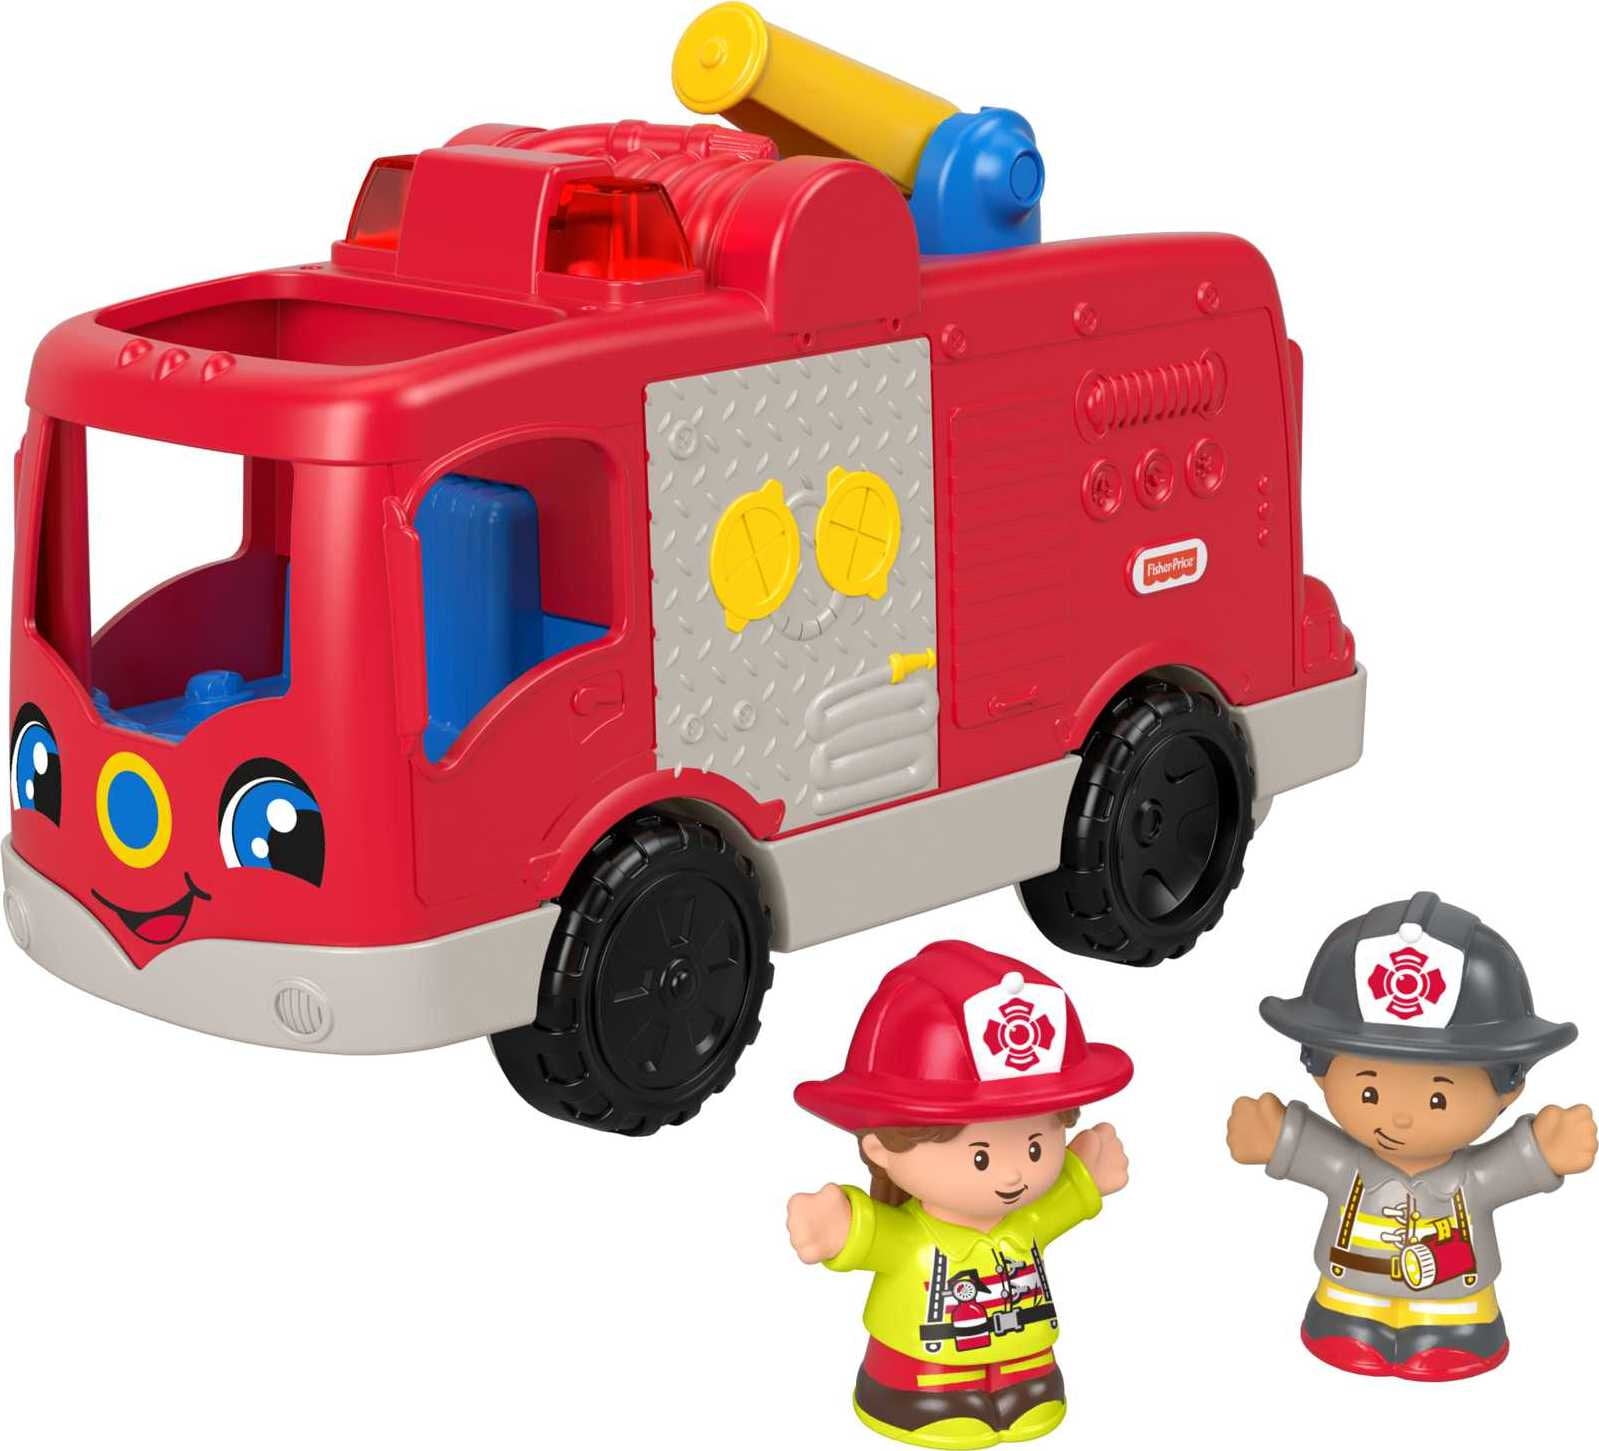 Details about   Hallmark Wood RESCUE PLAY SET Fire Truck Police Car People Toy Ages 2+ 